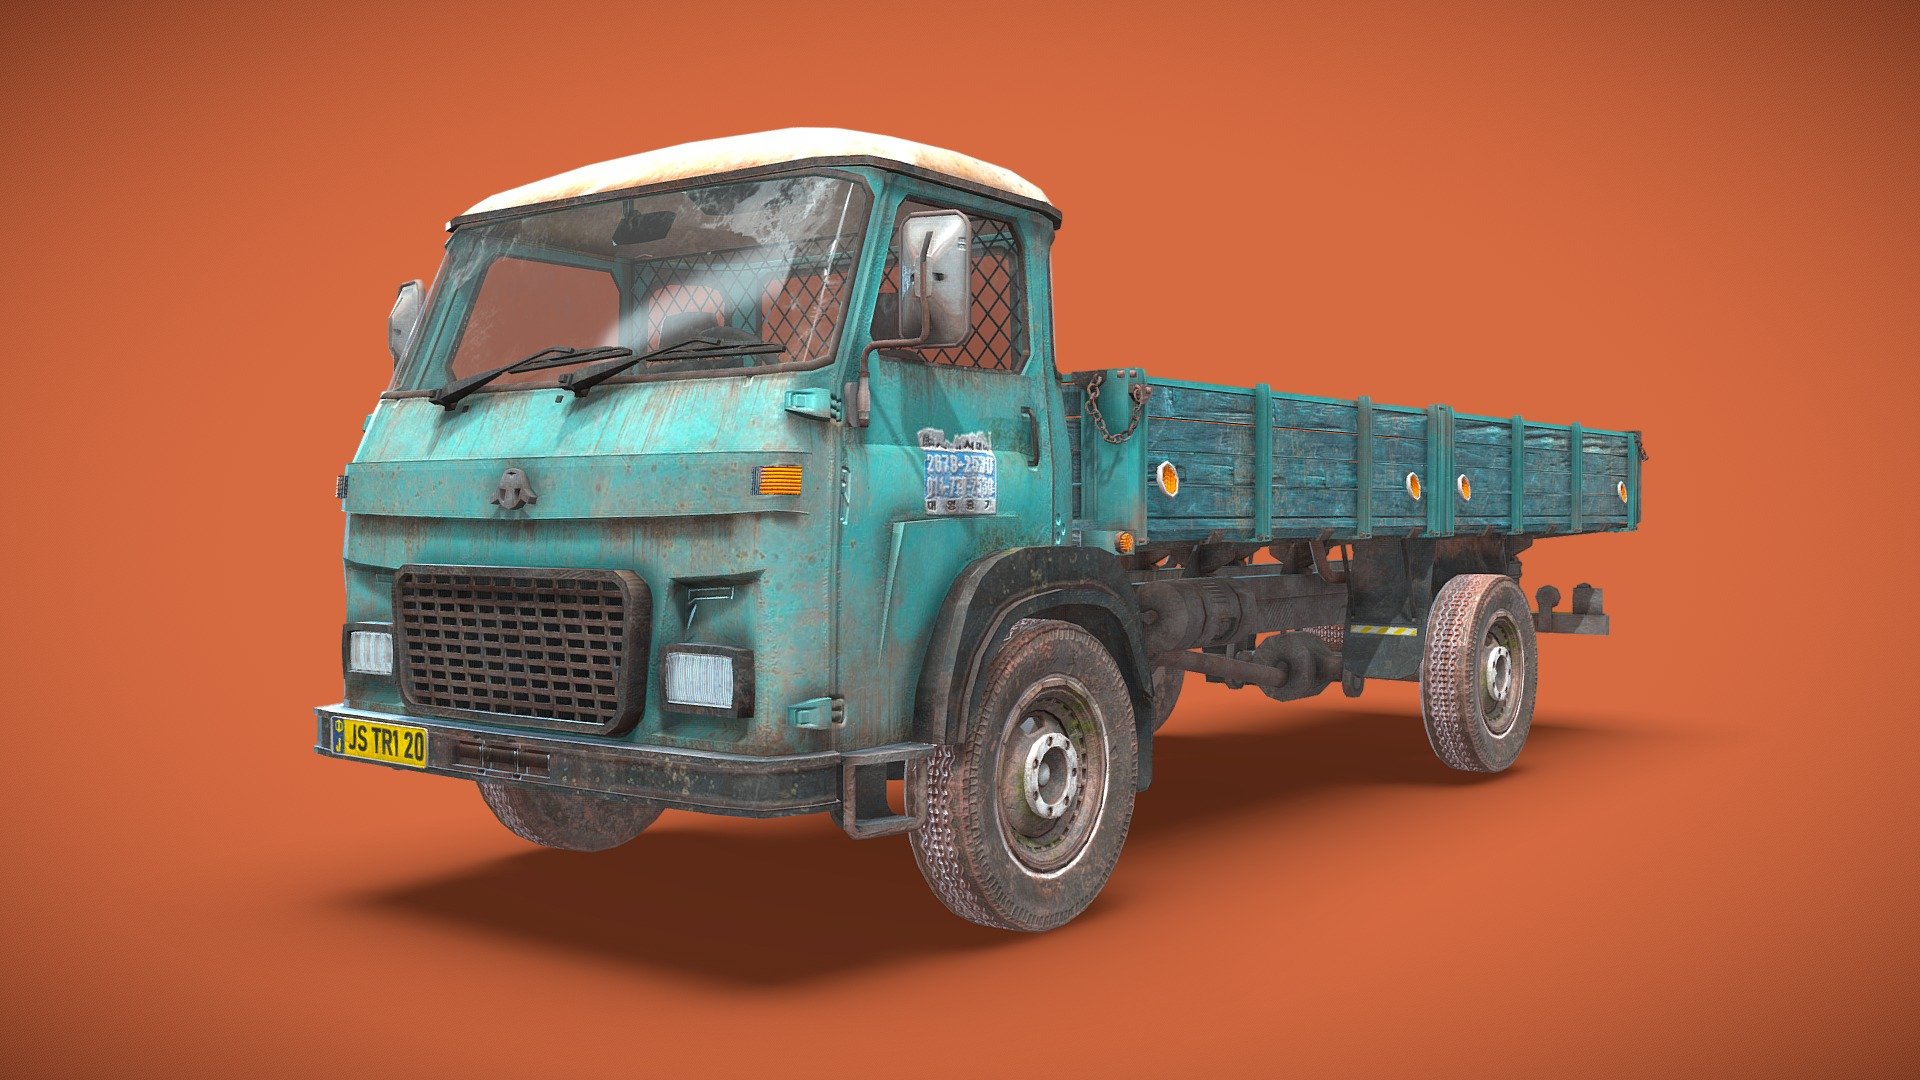 Lowpoly Truck ~19k verts
4 sets of 4K PBR textures for the main body, interior, details and tires. (BaseColor (+alpha), Metallic, Roughness, Bump, Normal)
.fbx and .png formats - Gameready Truck - Buy Royalty Free 3D model by jakobscheidt 3d model